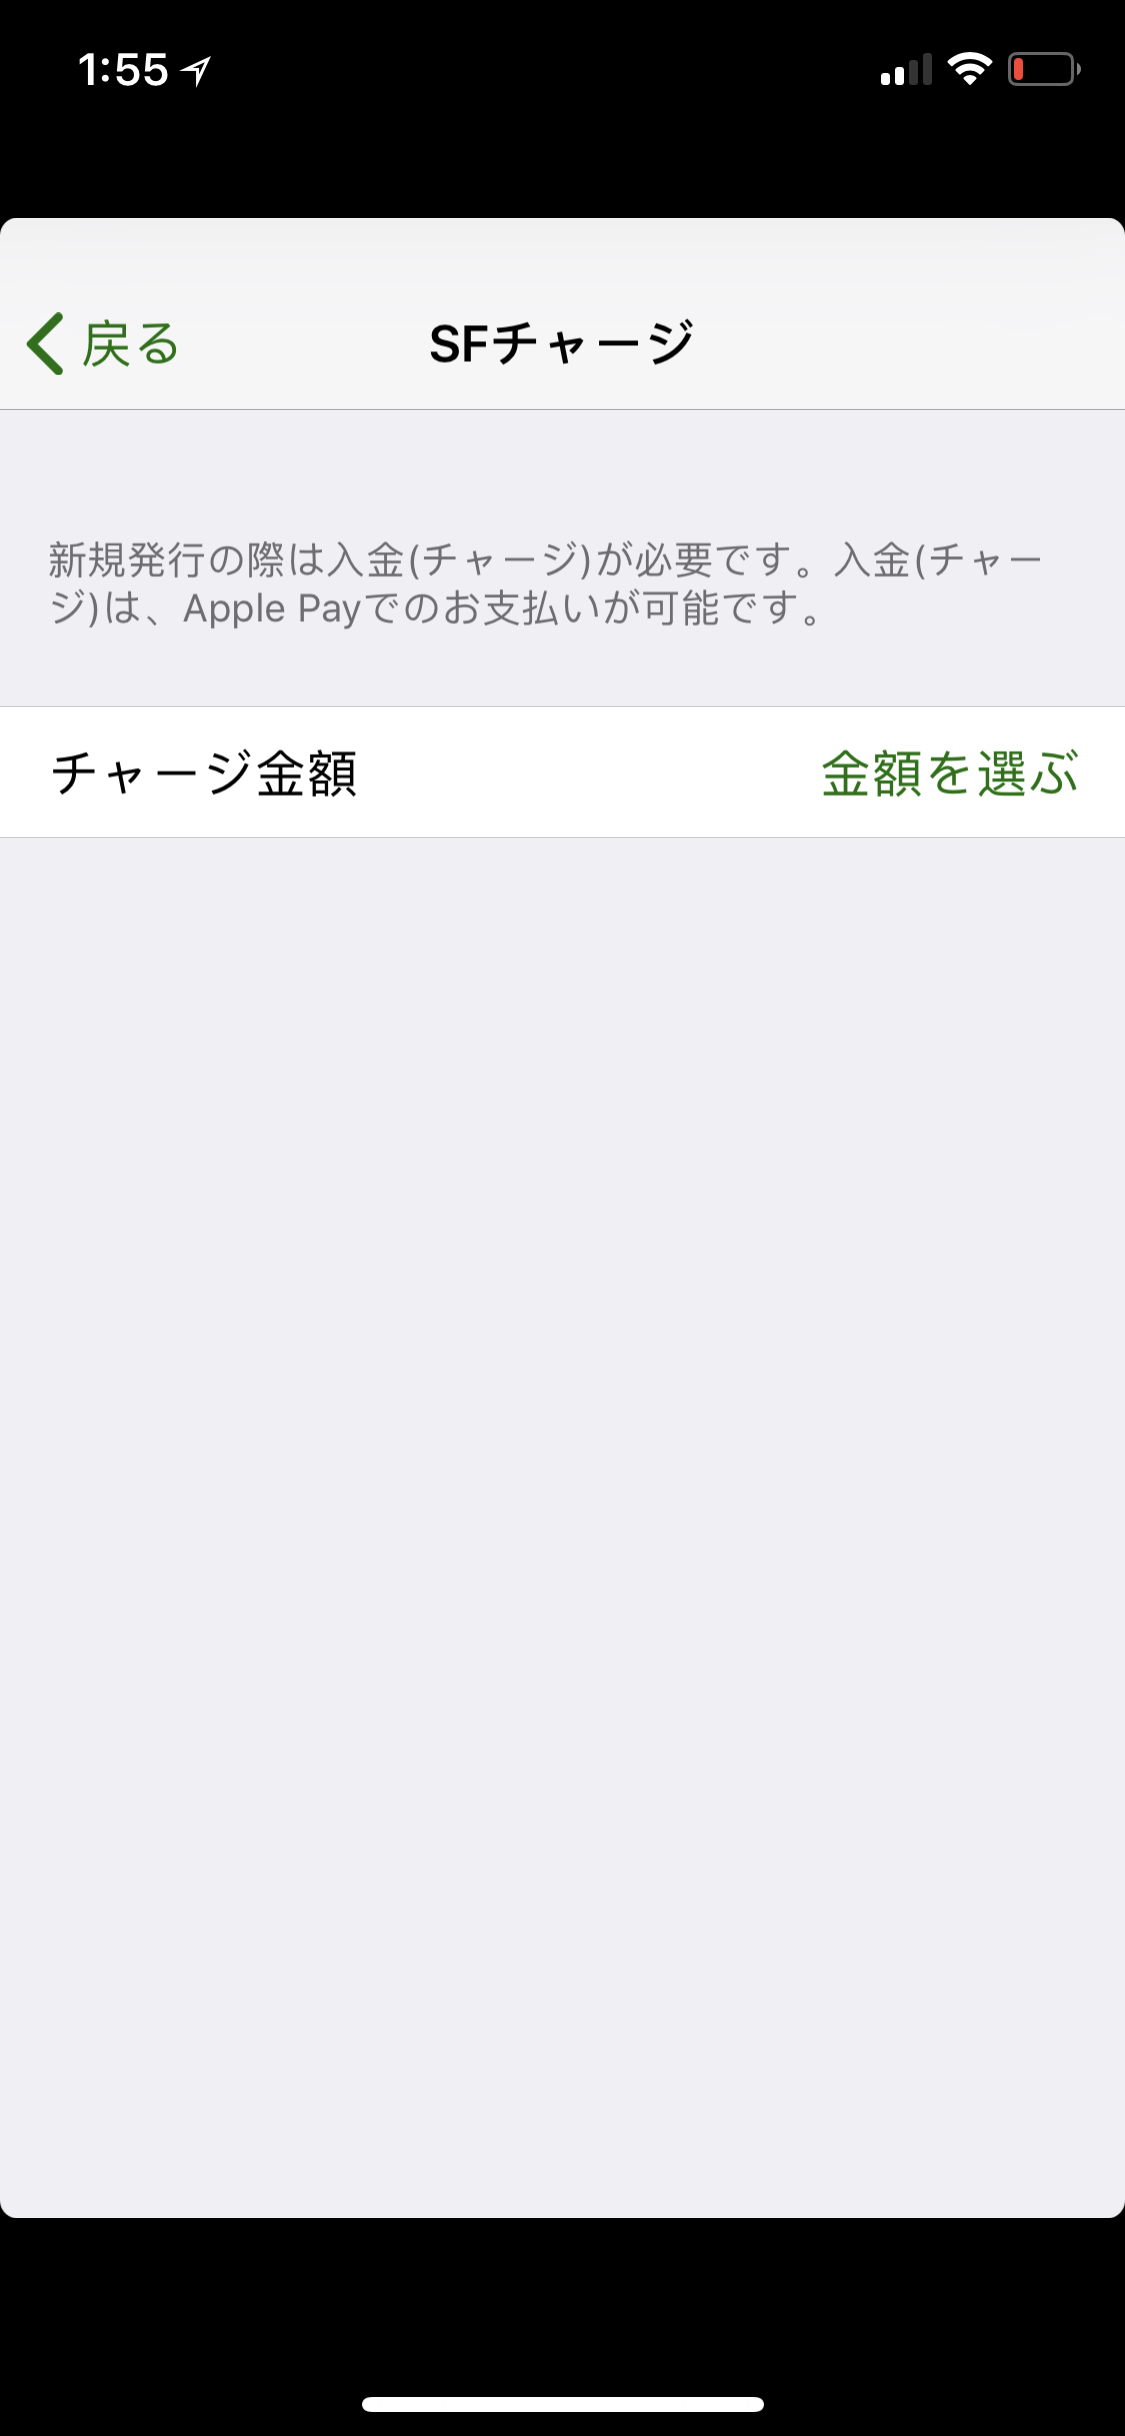 Screenshot of the Suica app initial balance page